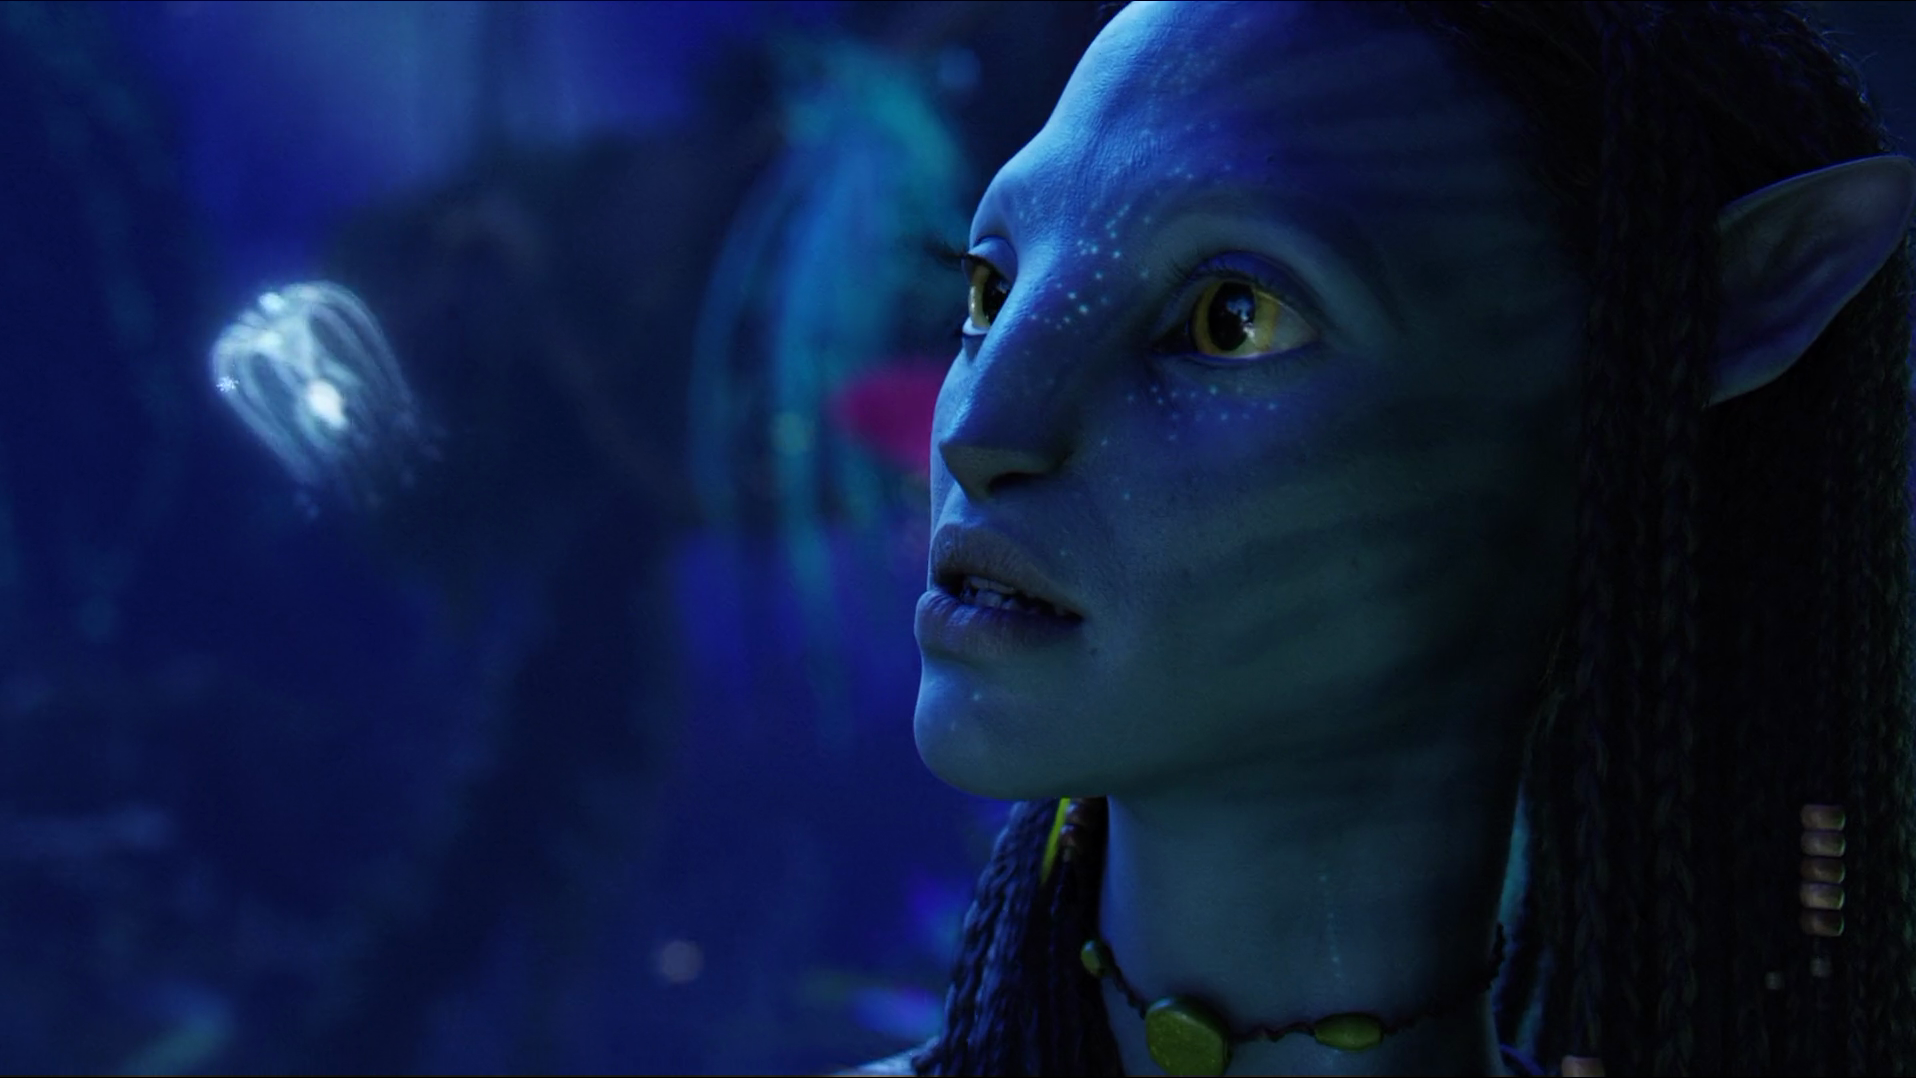 Avatar - Extended Collectors Edition (2009) 720p BrRip X264 - YI Download